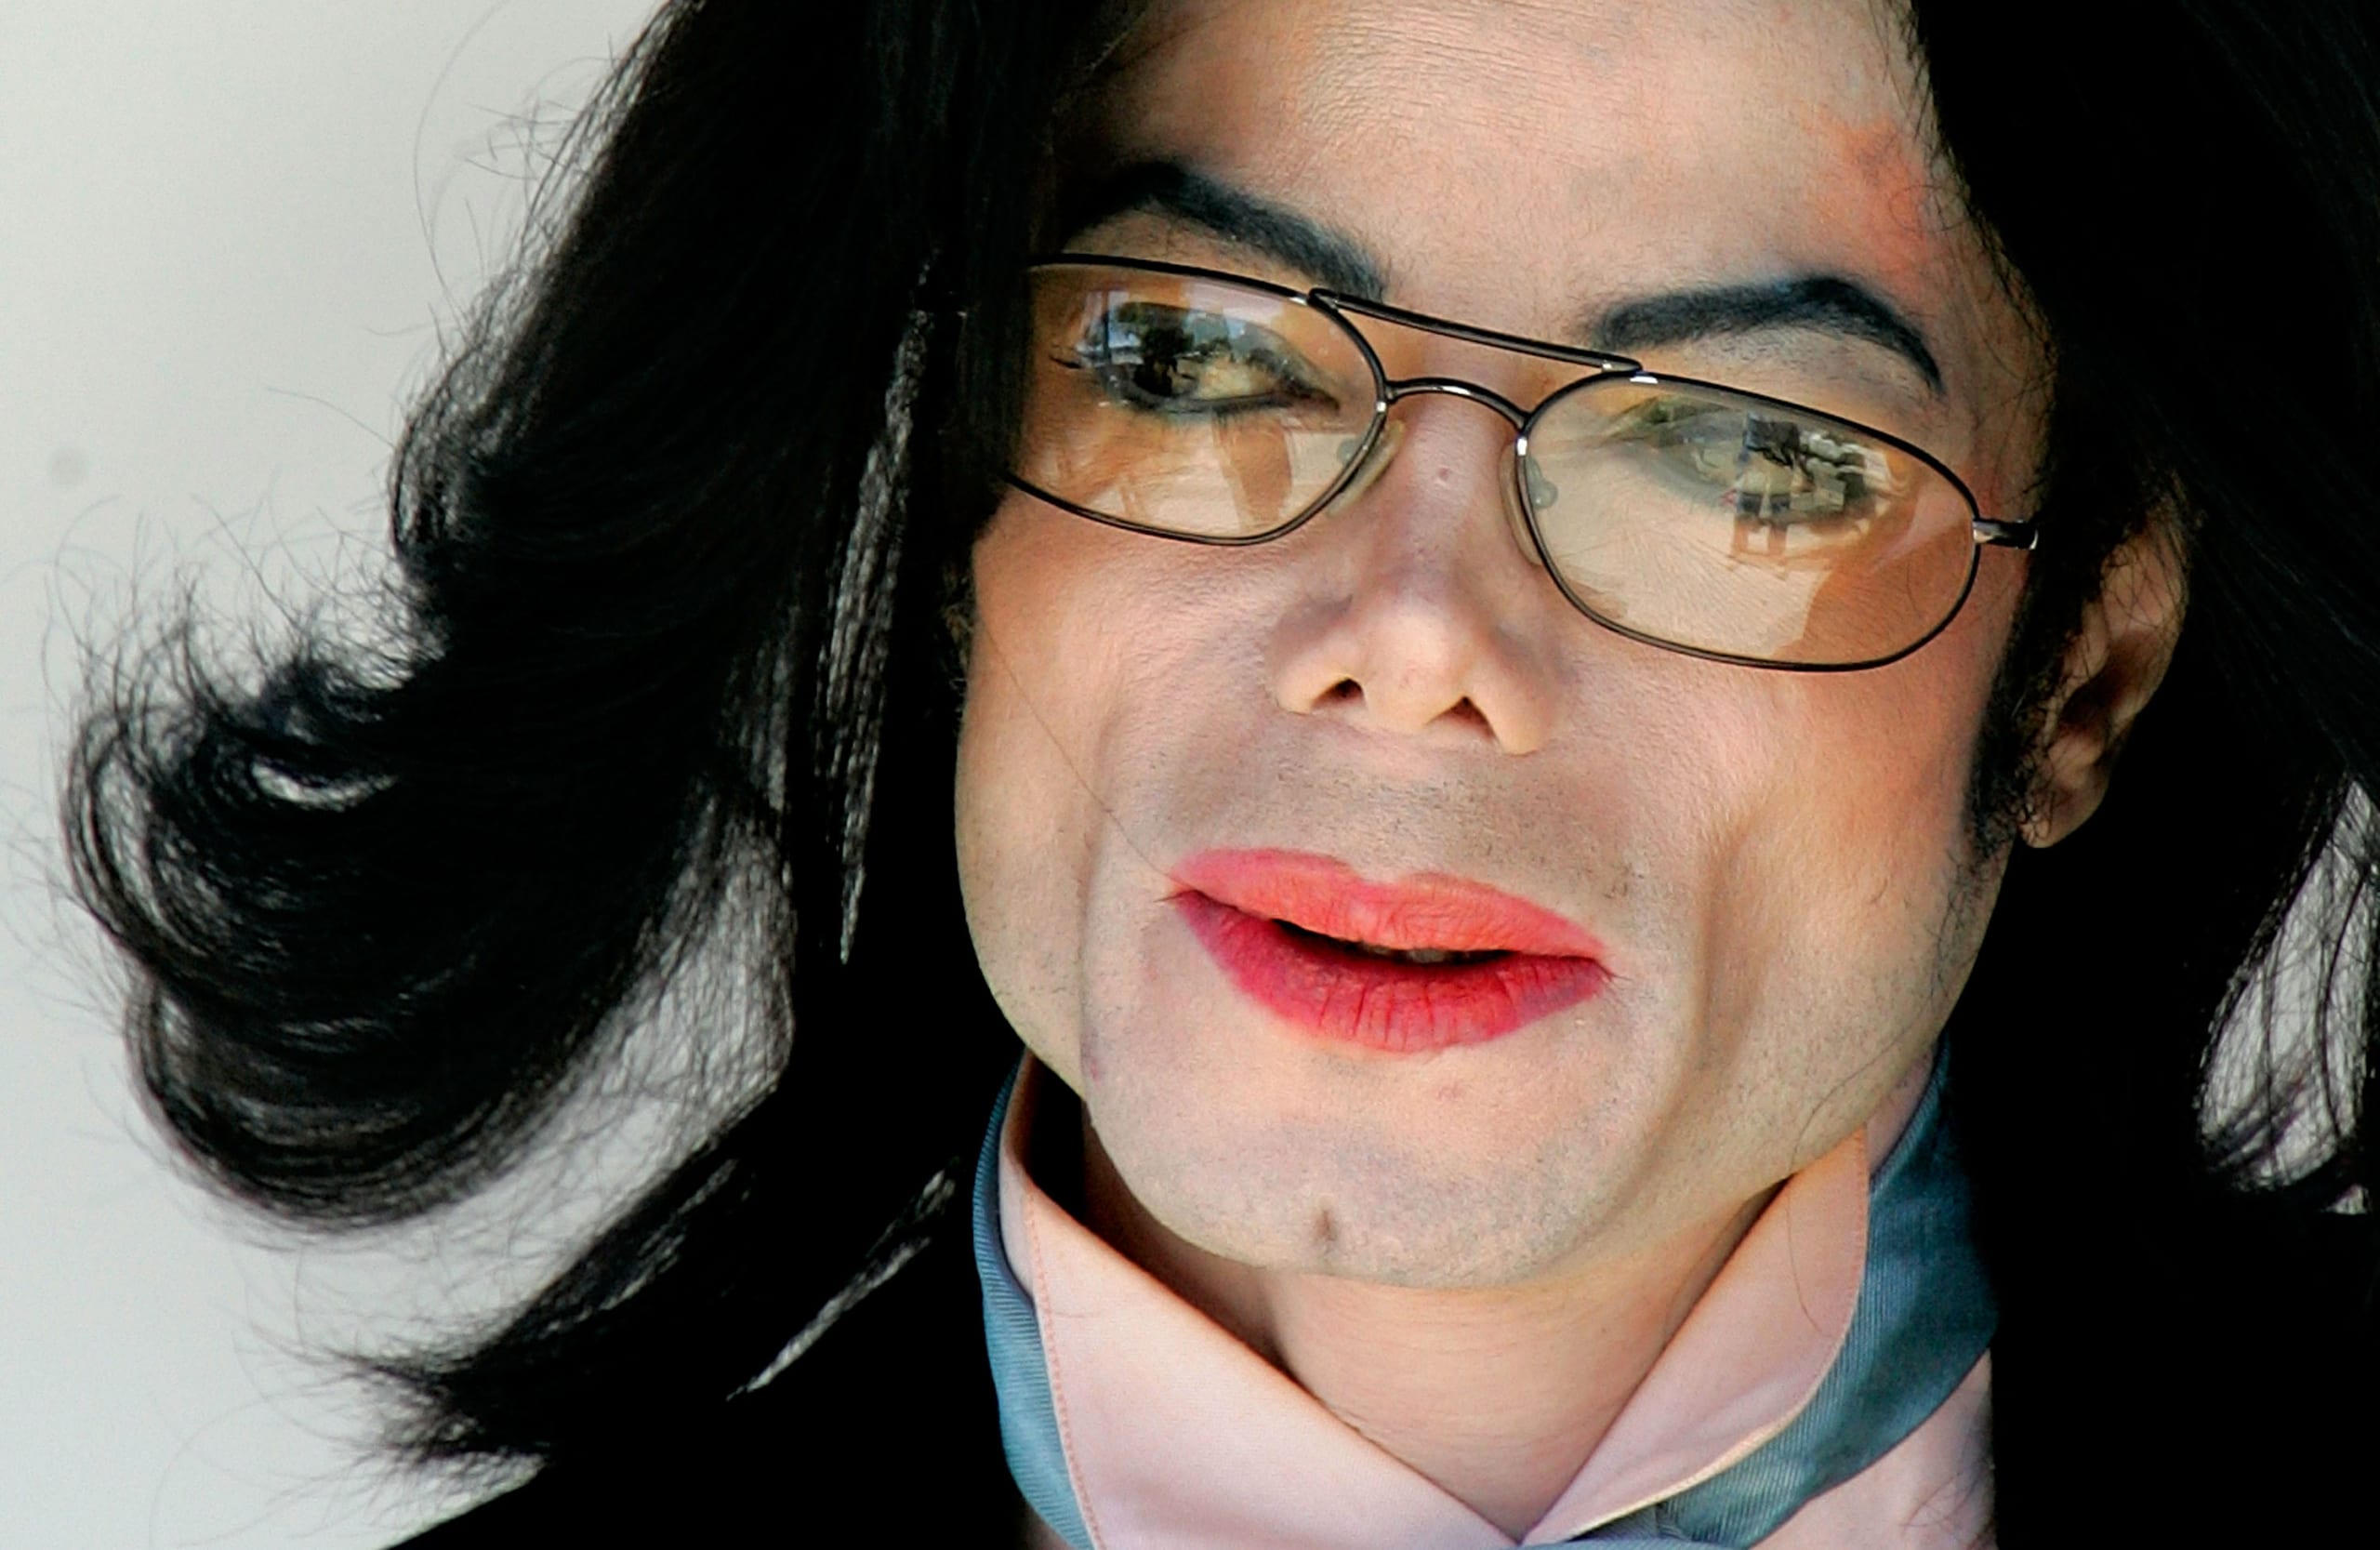 Watch: Michael Jackson’s Jehovah’s Witness faith was at odds with his musical expression